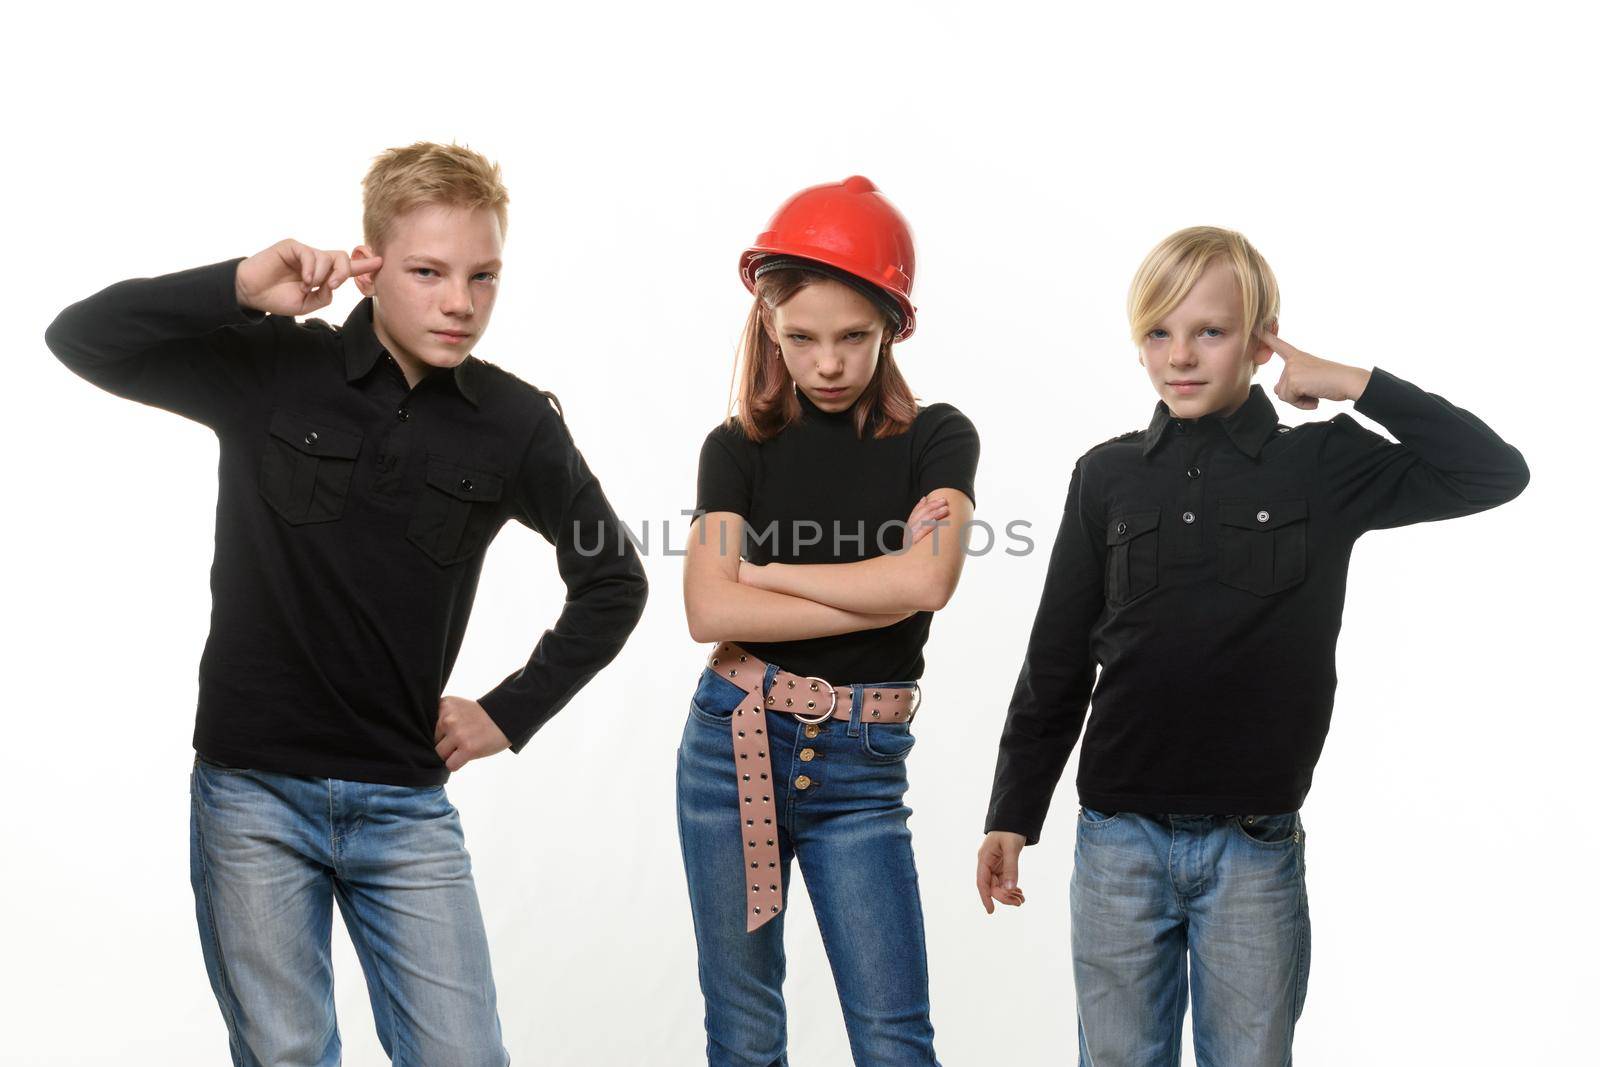 Two boys tease a girl, the girl is standing in a helmet in a helmet and puffed out her cheeks